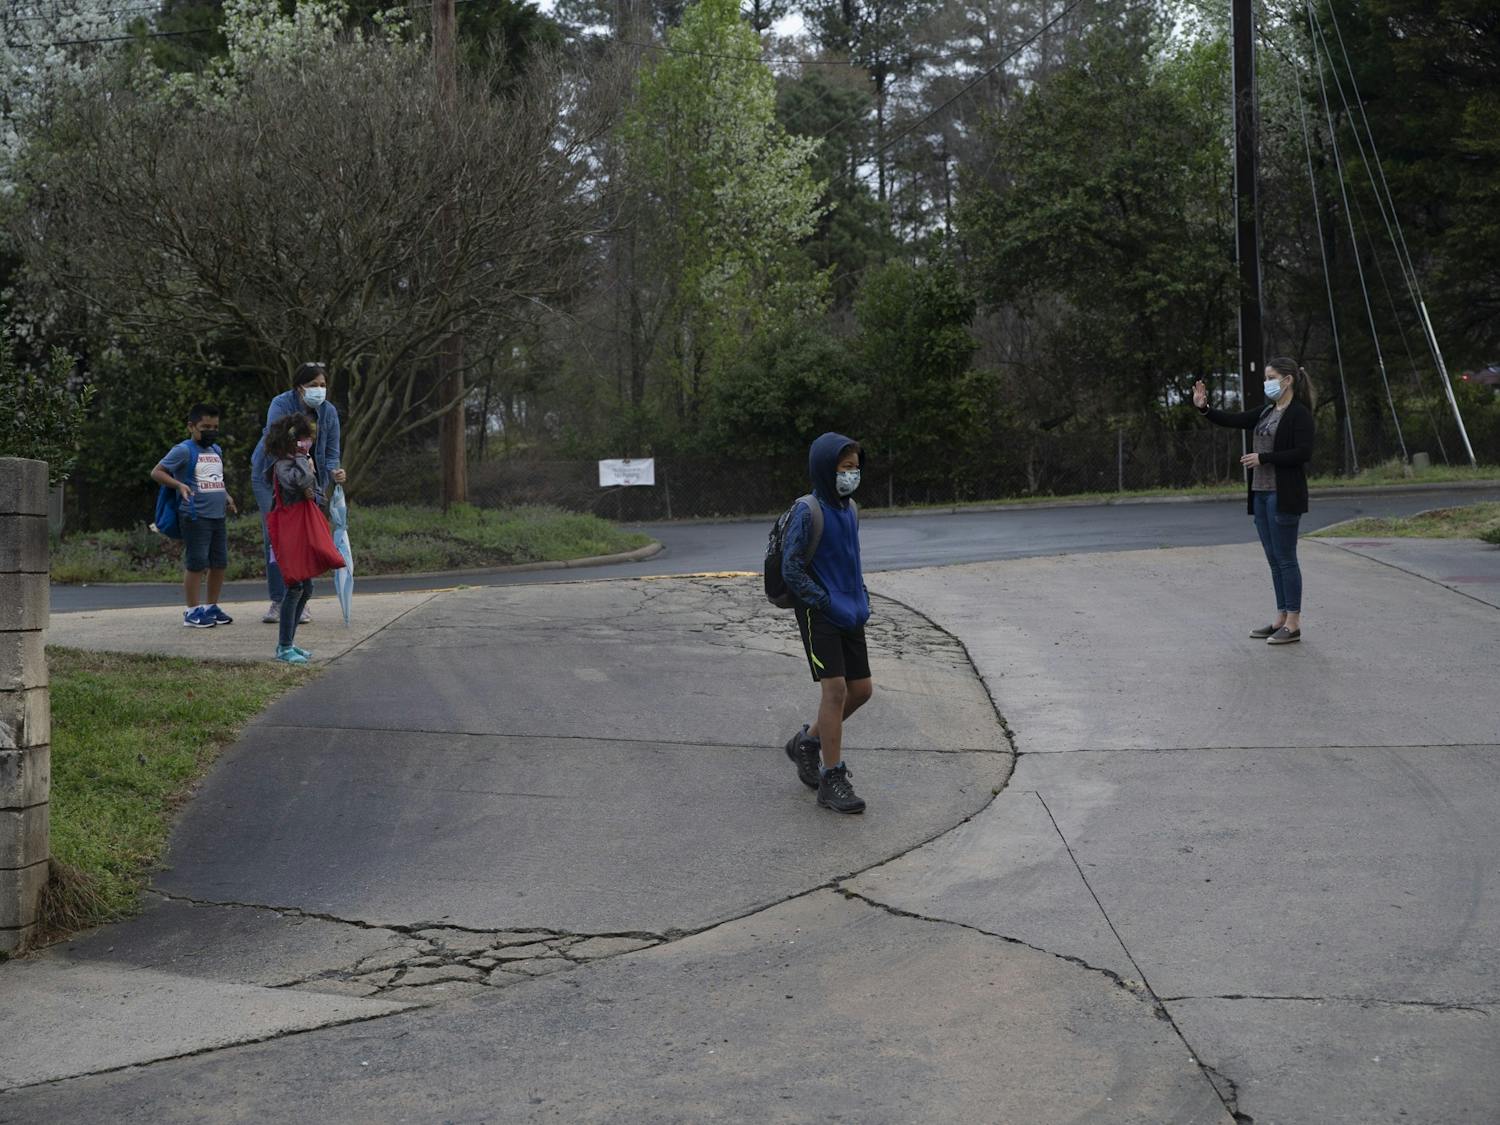 Students of Frank Porter Graham Elementary school walk from carpool toward the school early in the morning on March 26, 2021. CHCCS have recently reopened in-person instruction, although many children are still learning virtually.